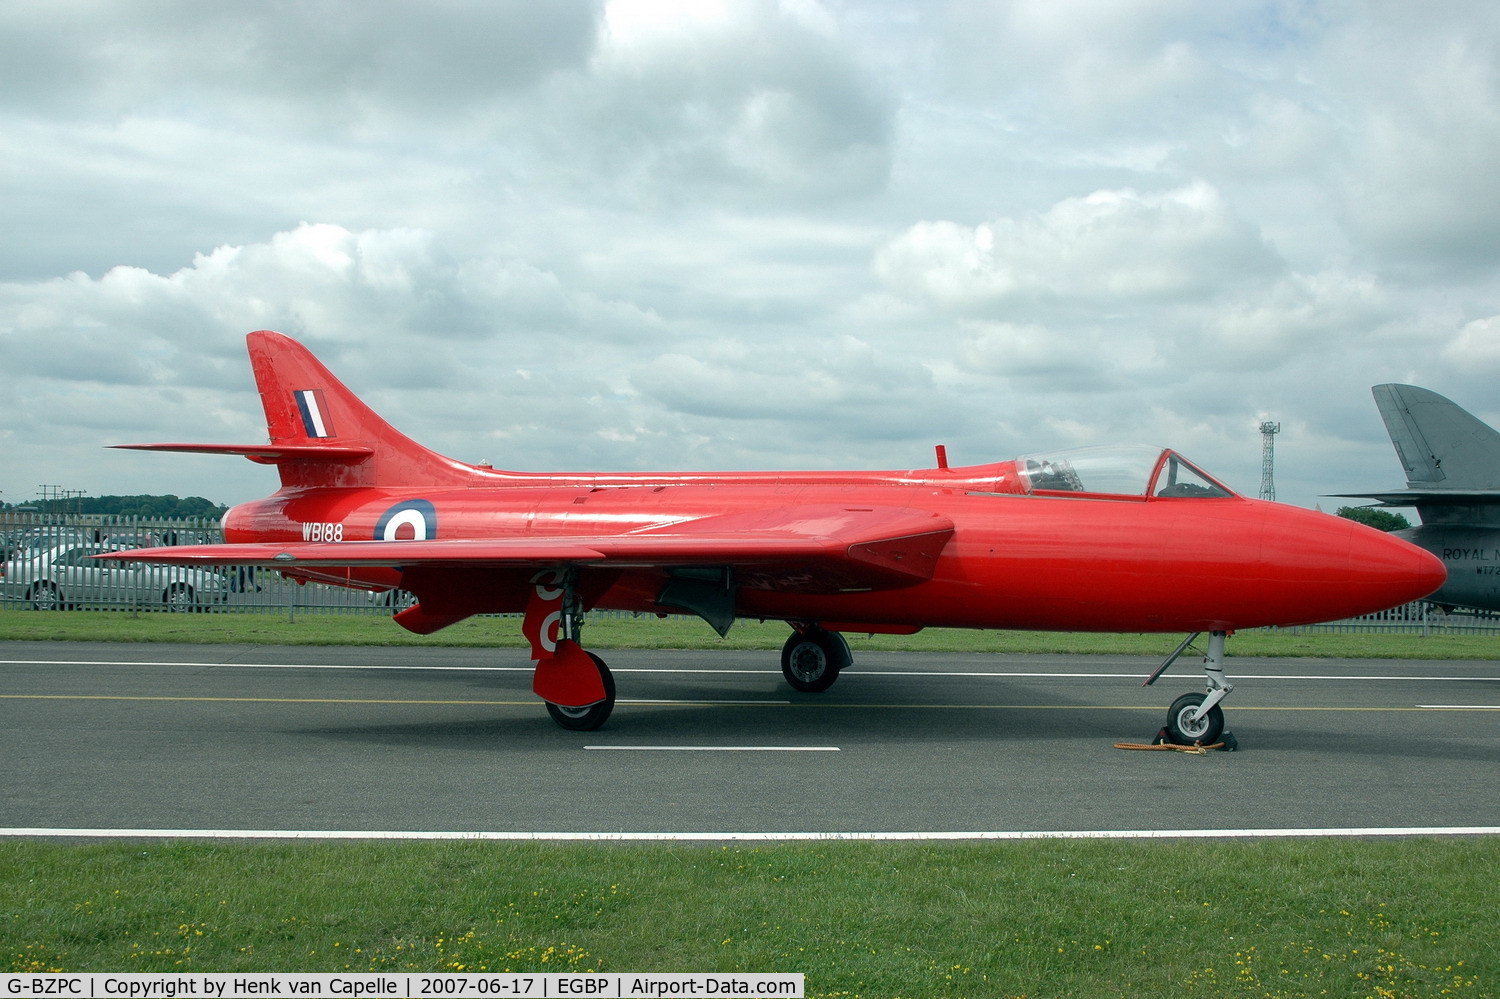 G-BZPC, 1955 Hawker Hunter GA.11 C/N HABL-003061, Hunter in red c/s of P.1067 in which Neville Duke set world air speed record 7 sept 1953 (ex XF300).